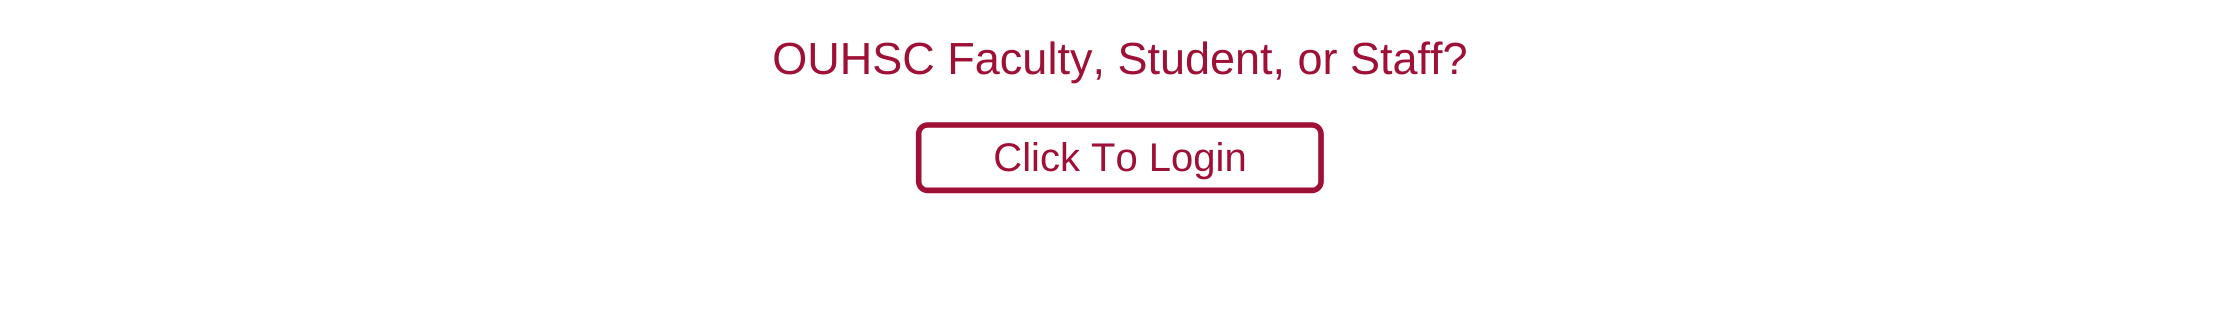 OUHSC Faculty, Student, or Staff Login